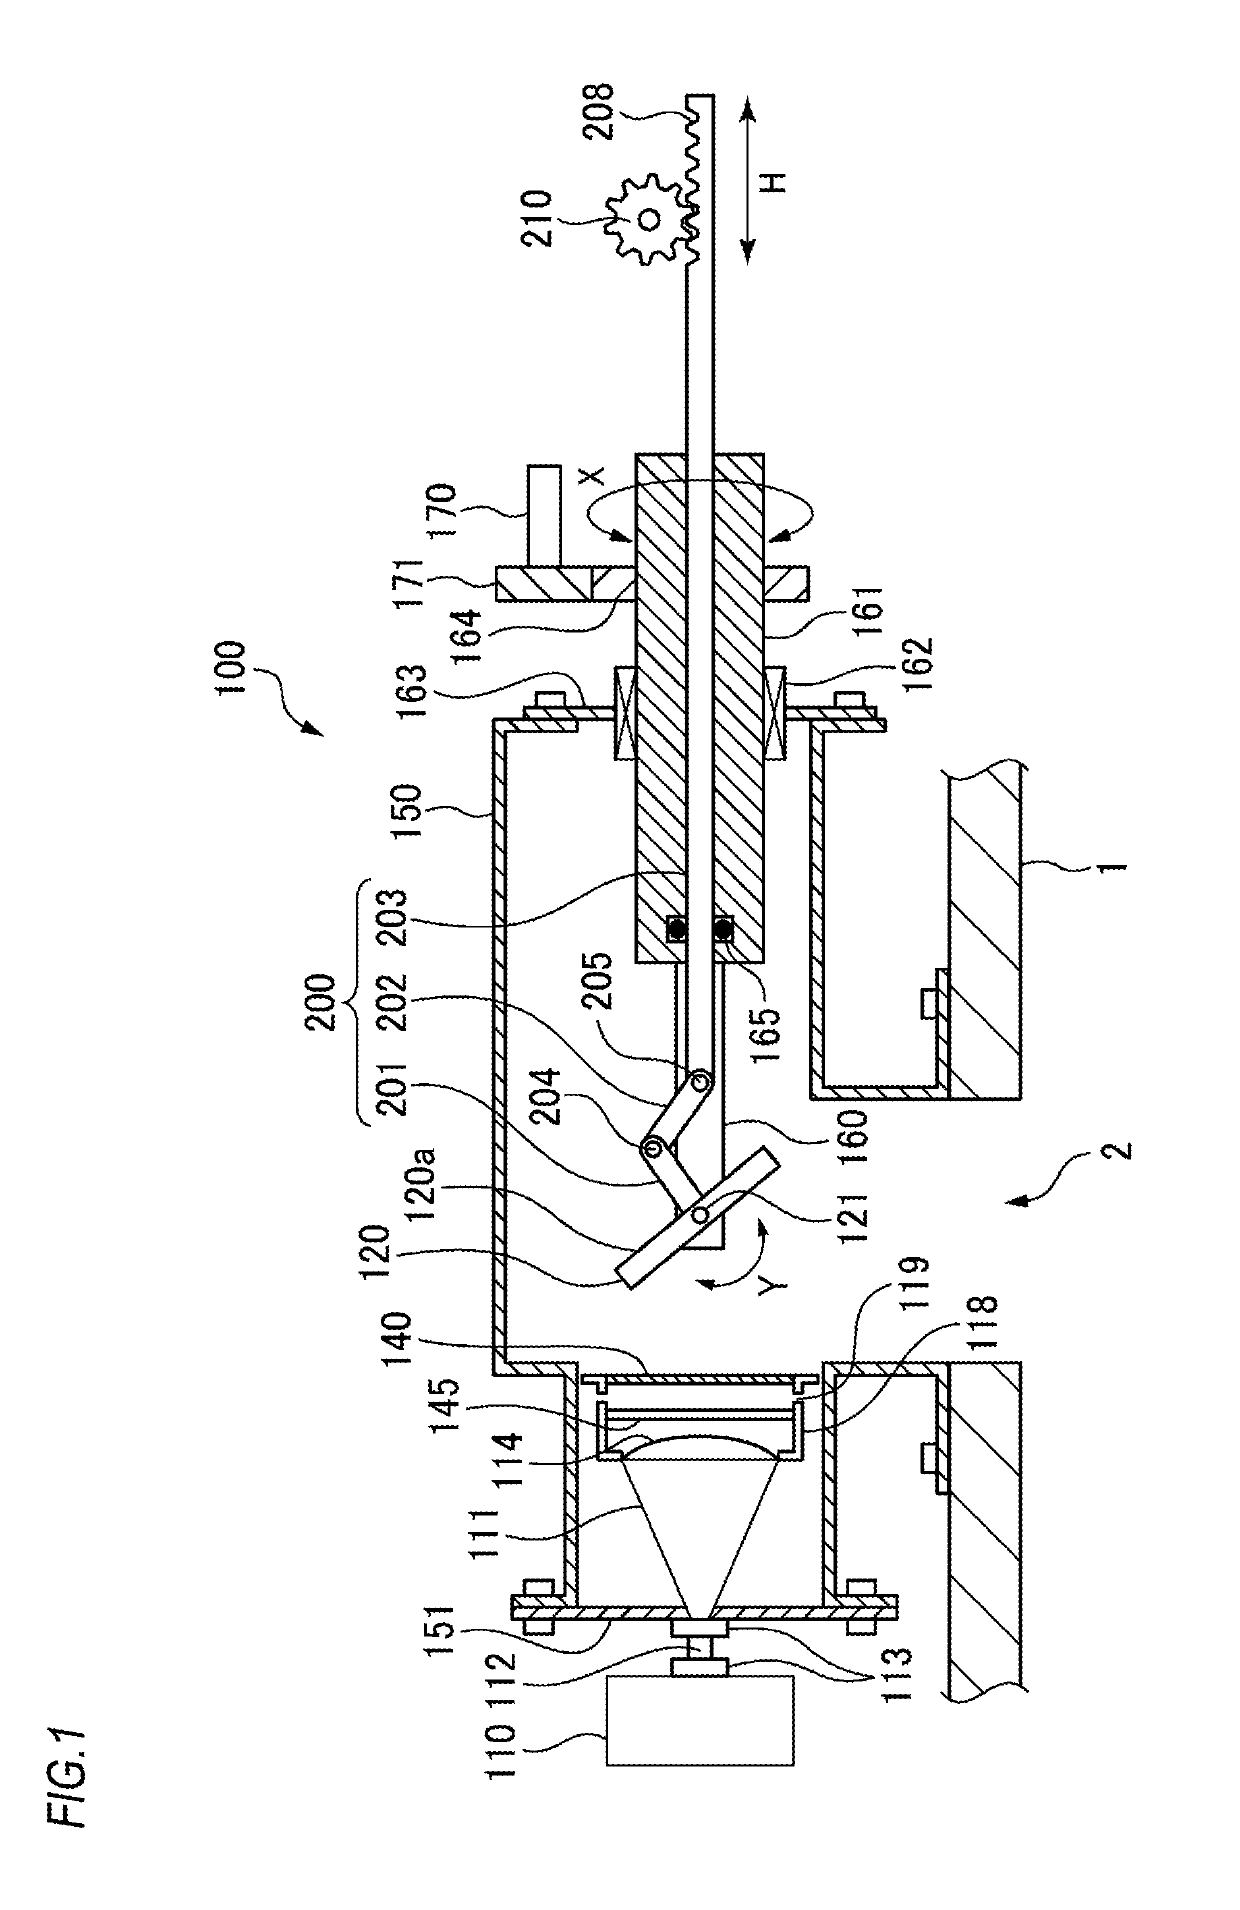 Surface detection apparatus for blast furnace